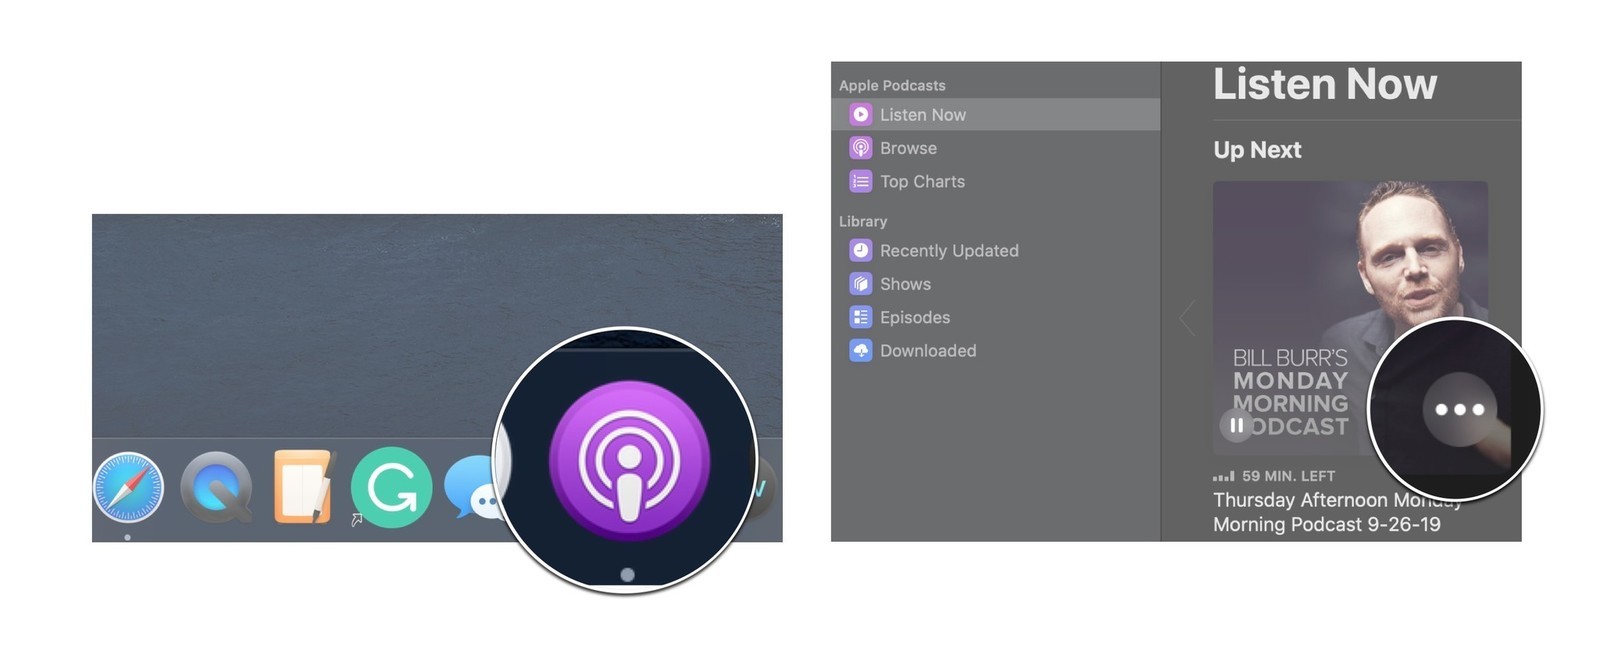 How To Delete Podcast App From Mac